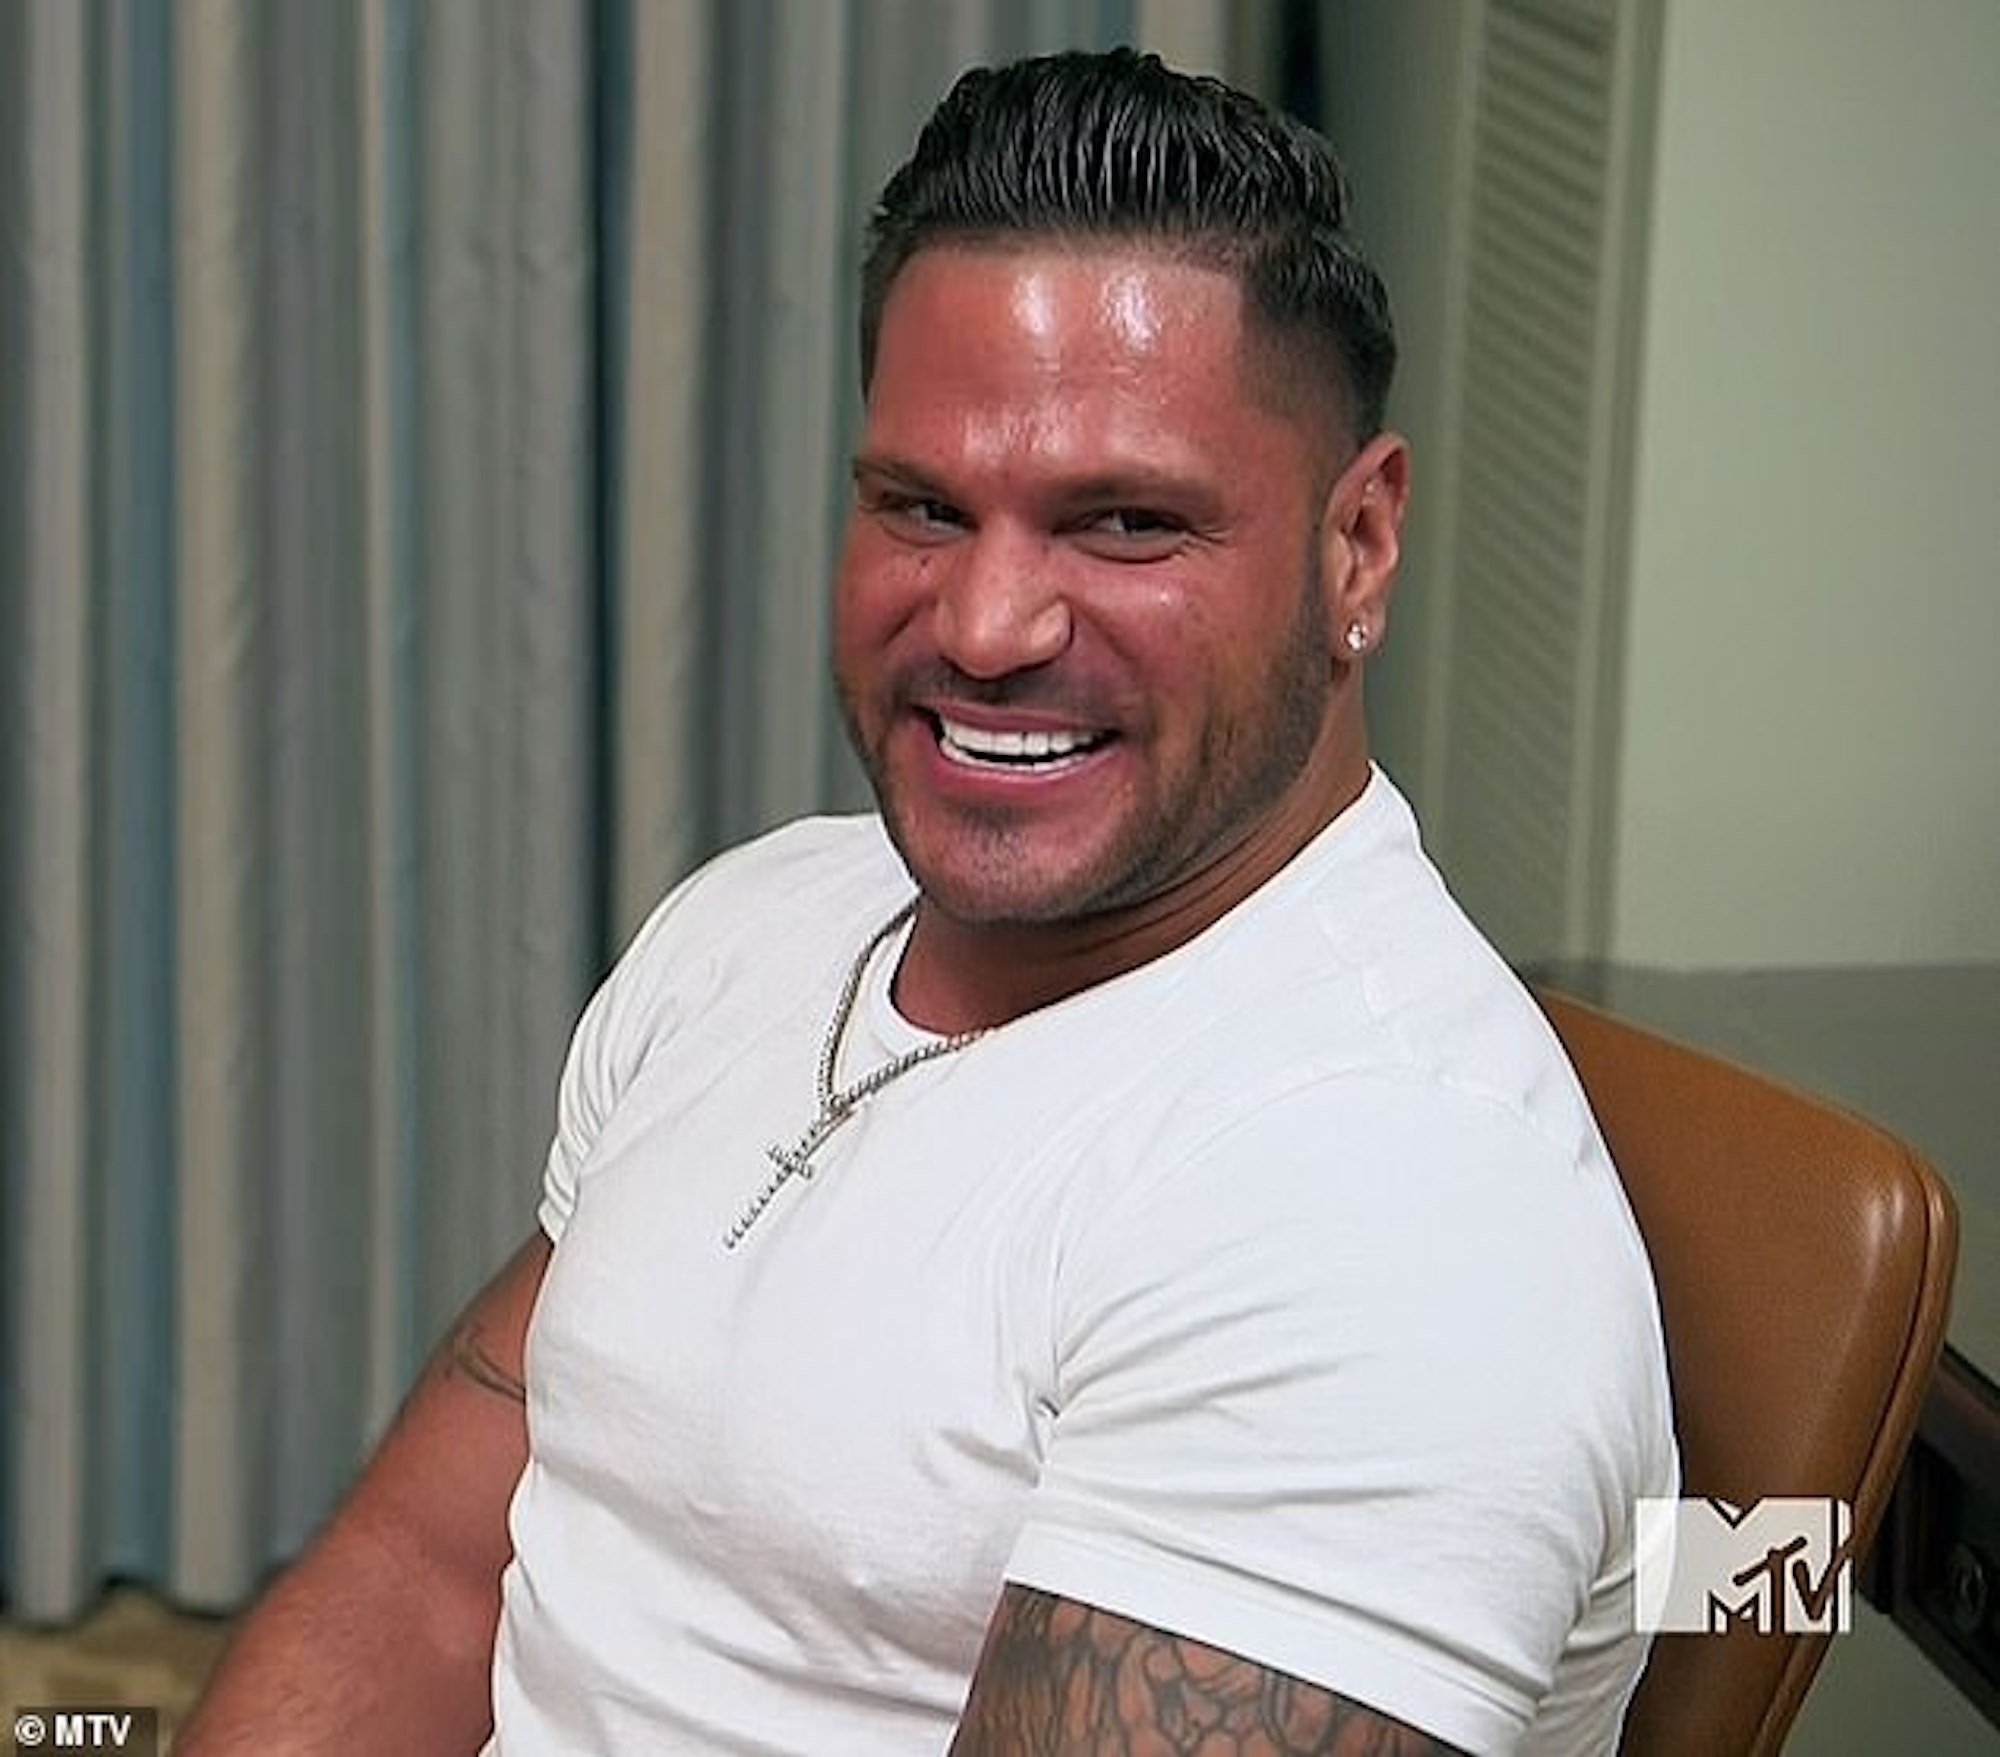 'Jersey Shore: Family Vacation' star Ronnie Ortiz-Magro smiles in an episode of the MTV series